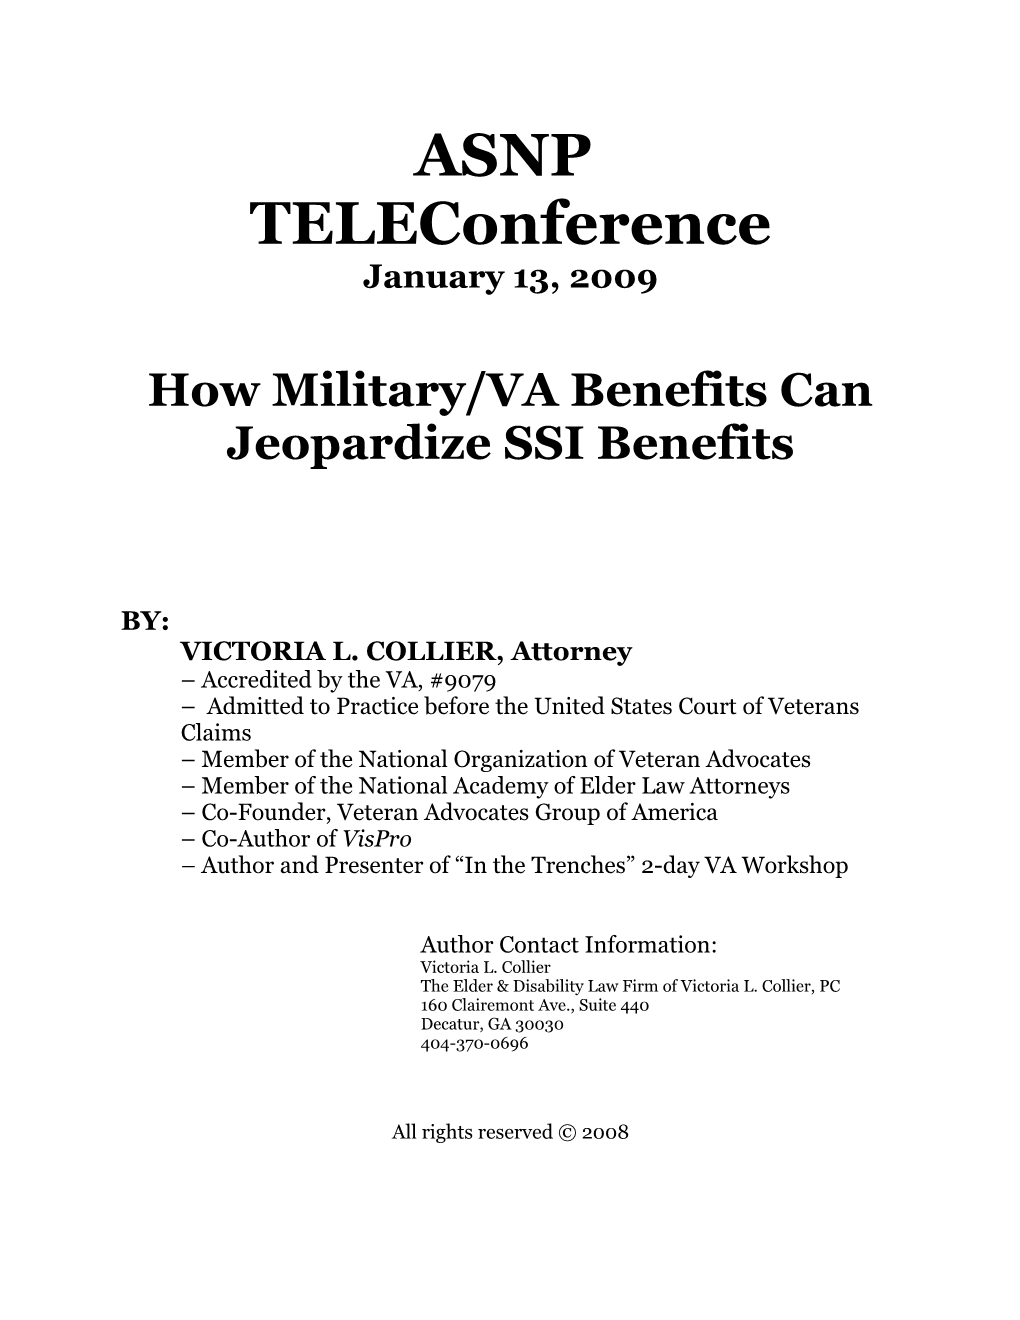 How Military/VA Benefits Can Jeopardize SSI Benefits